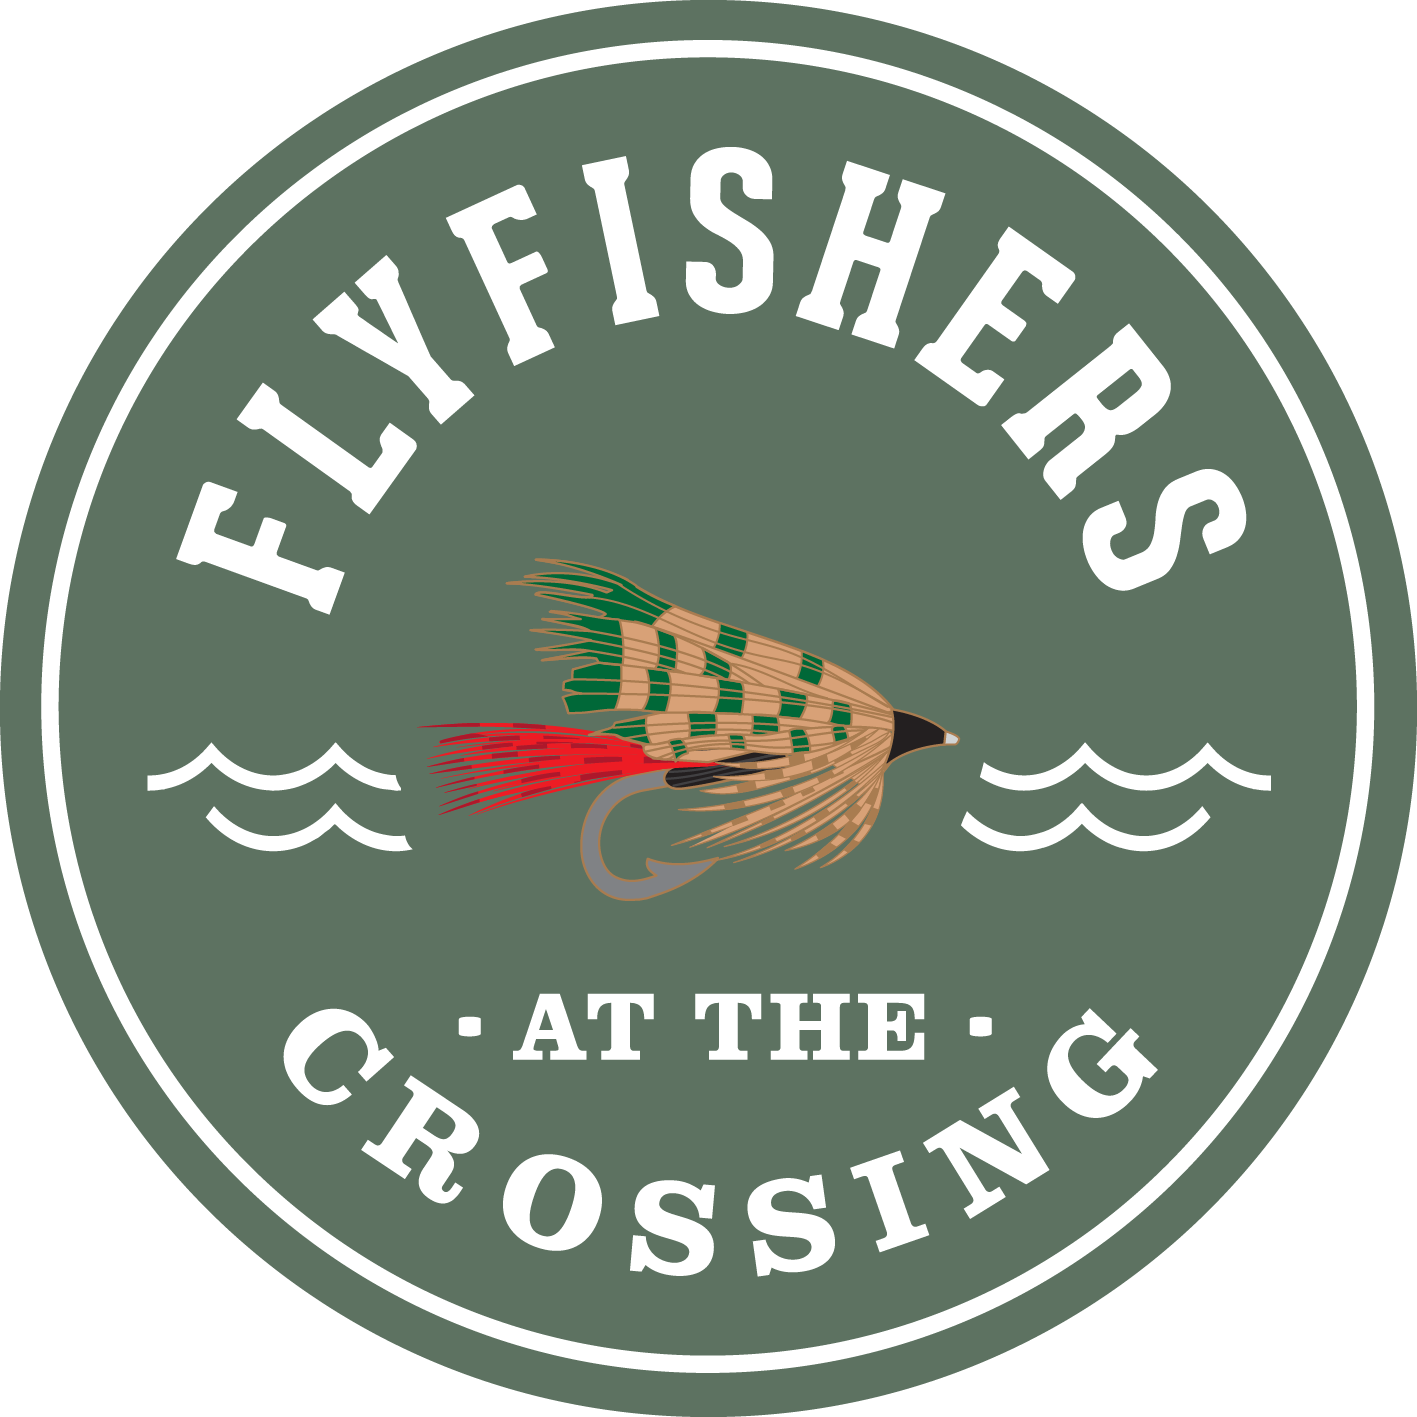 Fayettechill - Where are our fly fishers at? 🎣 Make sure